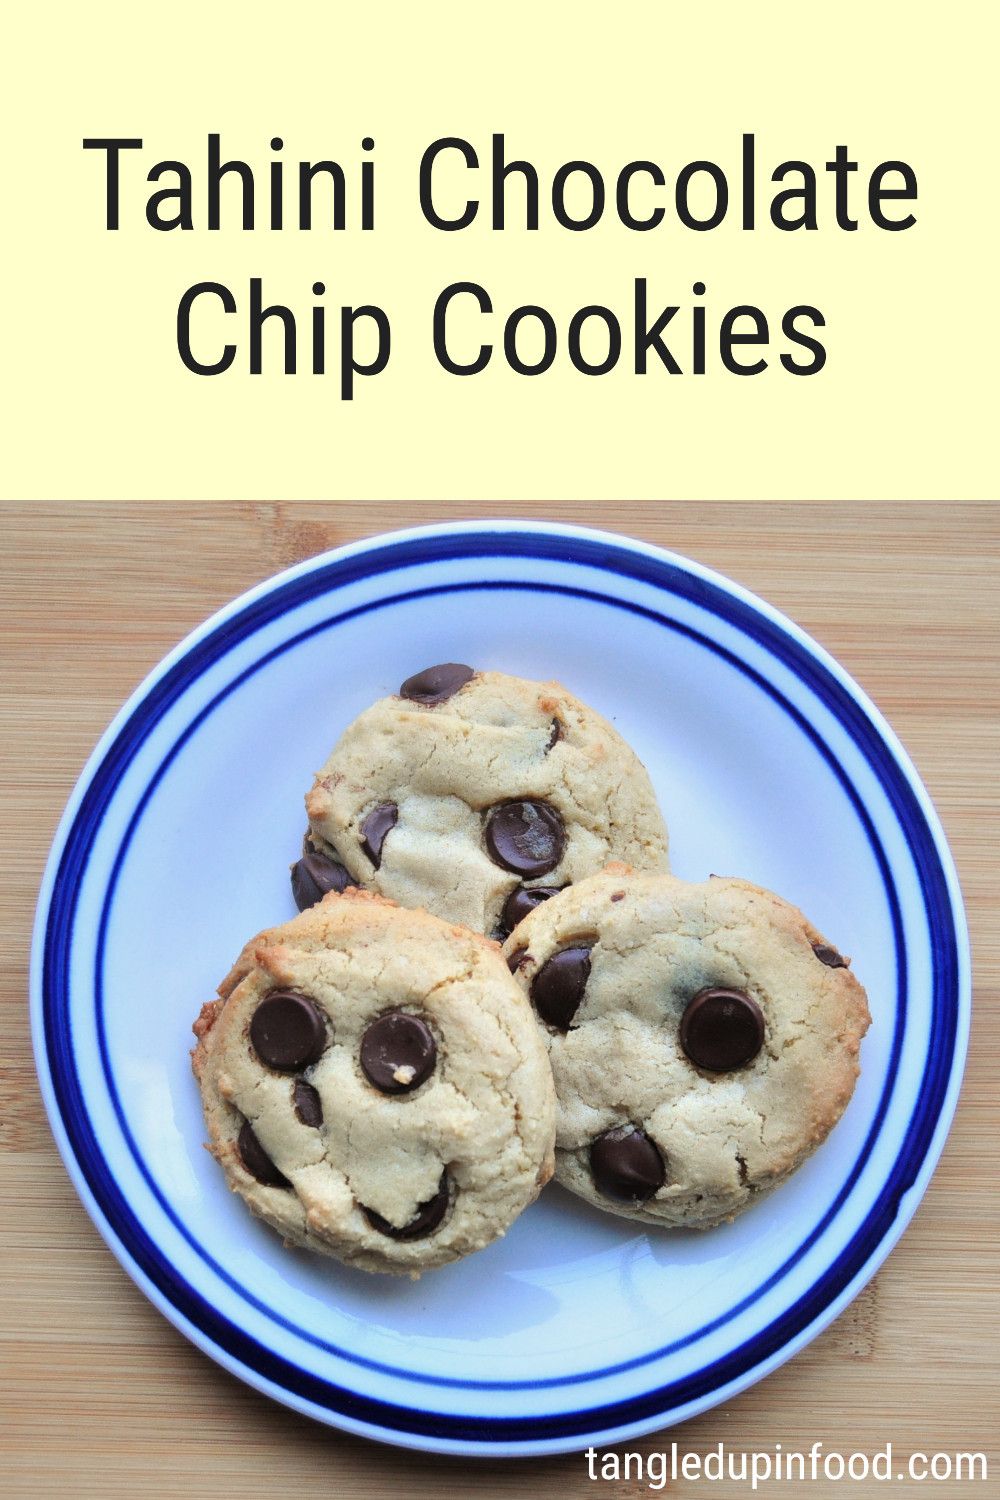 Photo of three cookies on a plate with text reading "Tahini Chocolate Chip Cookies"